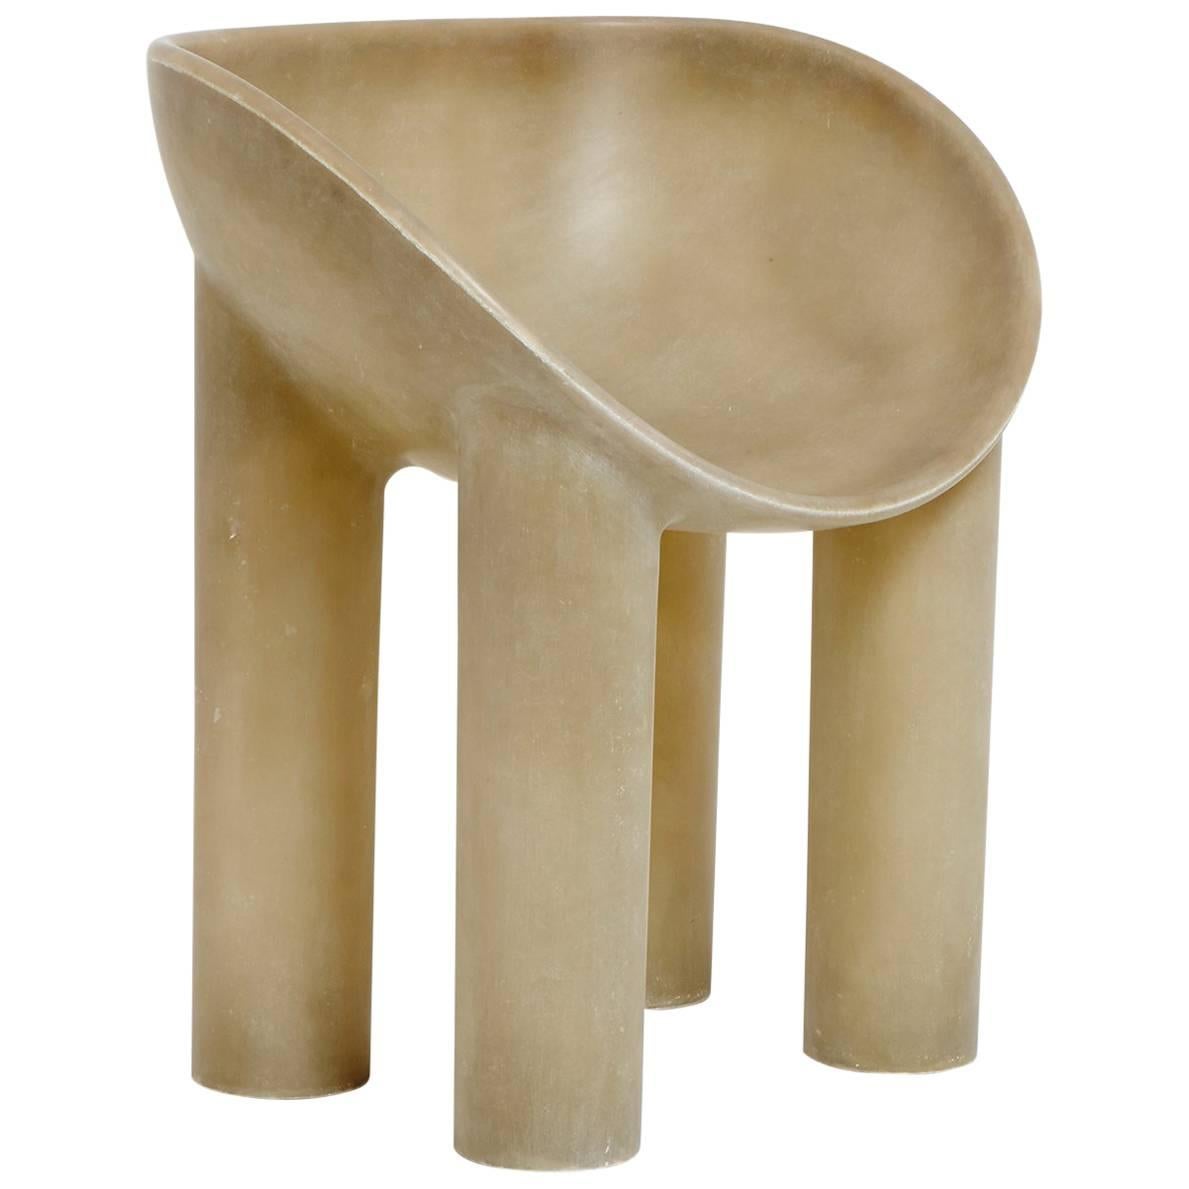 Faye Toogood Roly Poly Dining Chair Raw For Sale